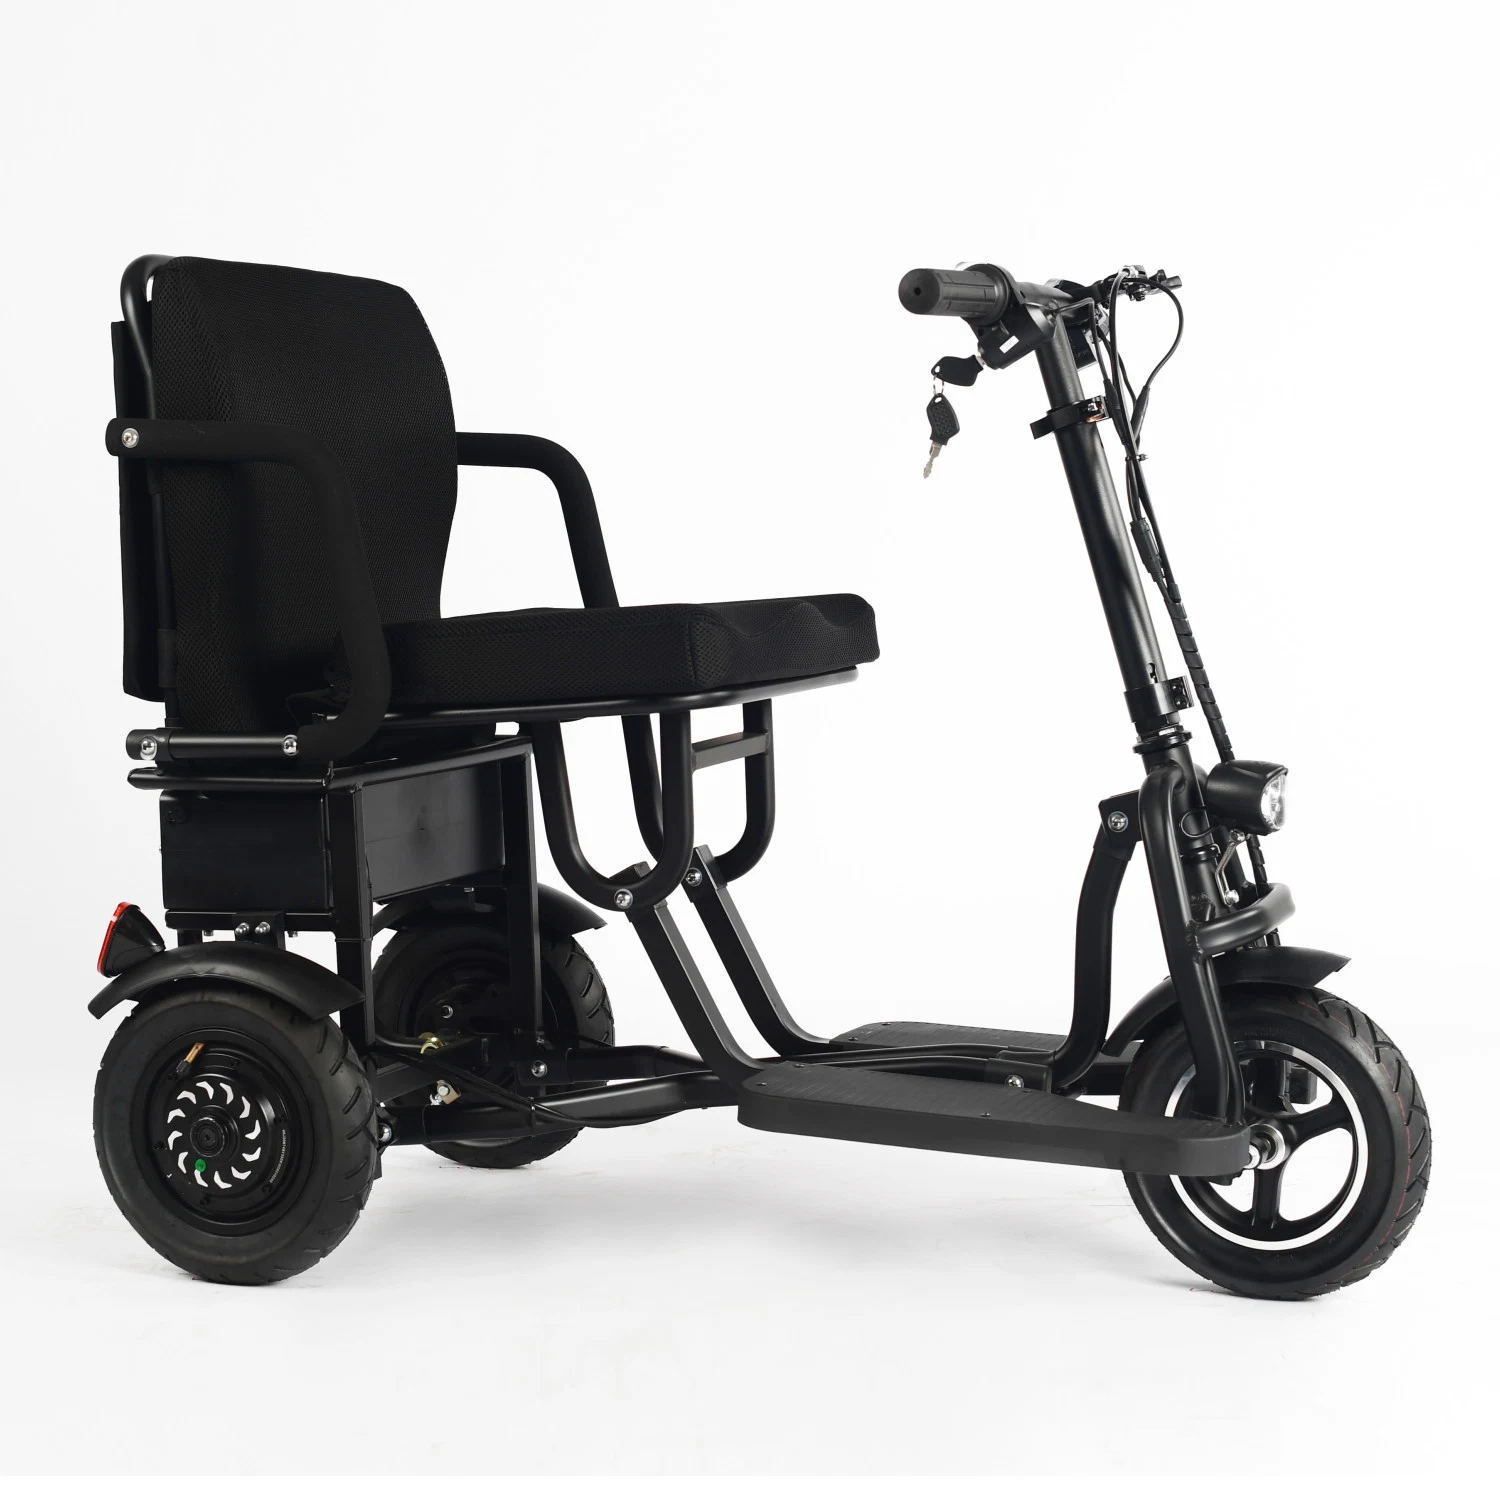 Portable Folding 3 Wheel Electric Bicycle Scooter with Seat for The Disability People